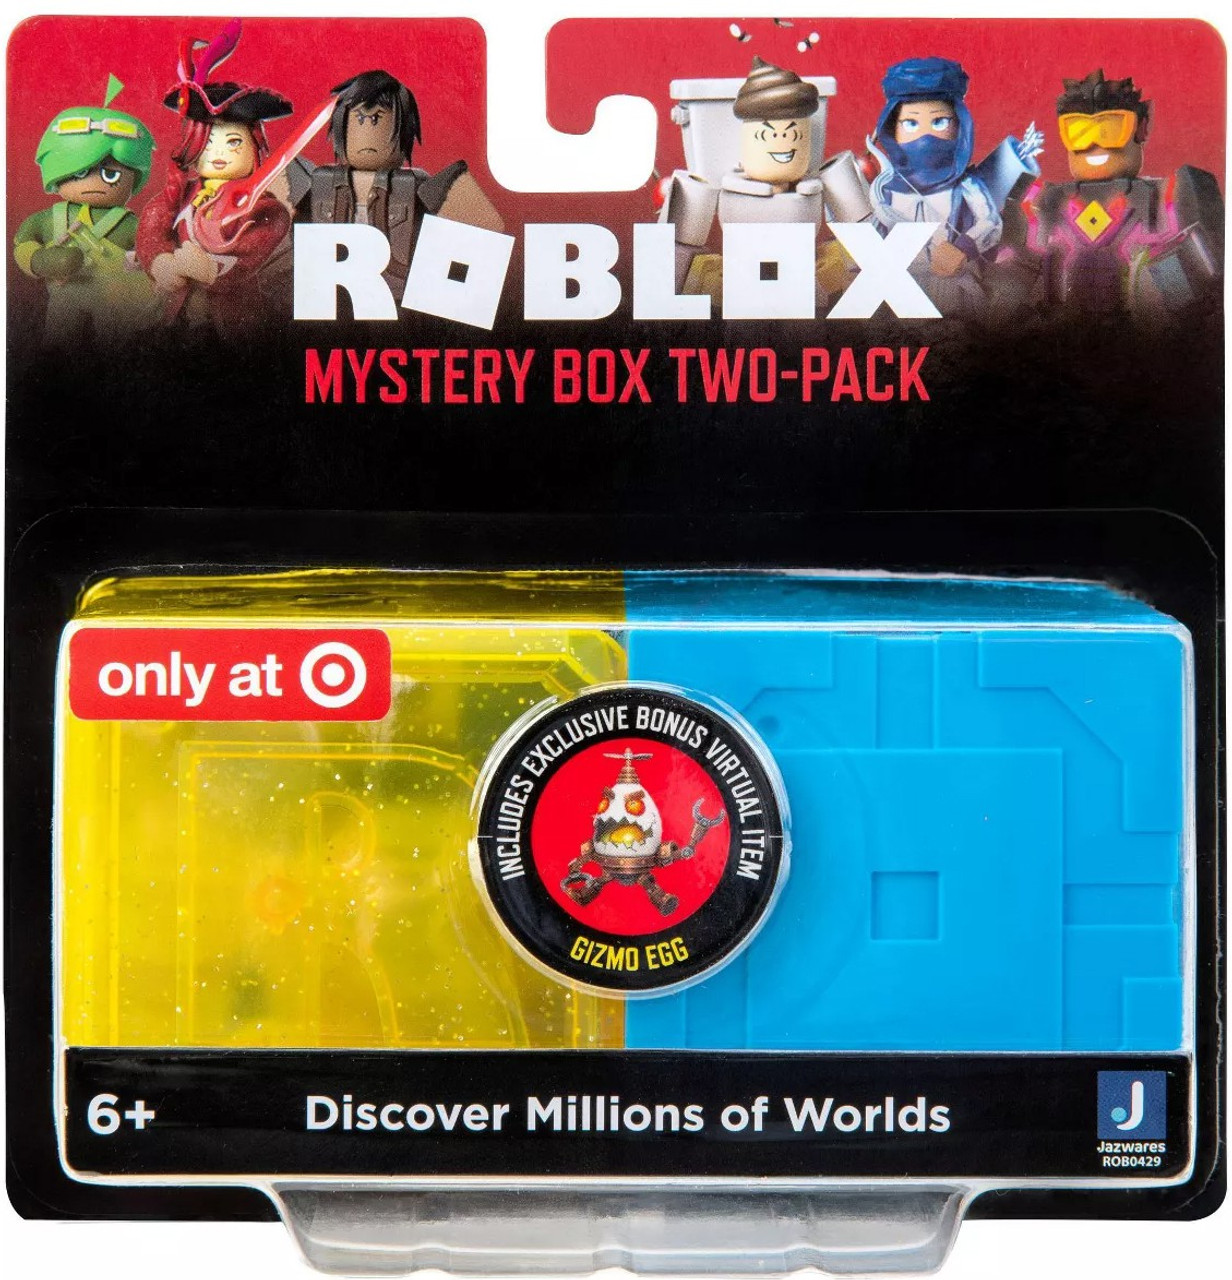 Roblox Series 9 Celebrity Series 7 Exclusive Mystery 2 Pack Easter Set Bonus Gizmo Egg Virtual Item Code Included Jazwares Toywiz - roblox nfl 2 codes